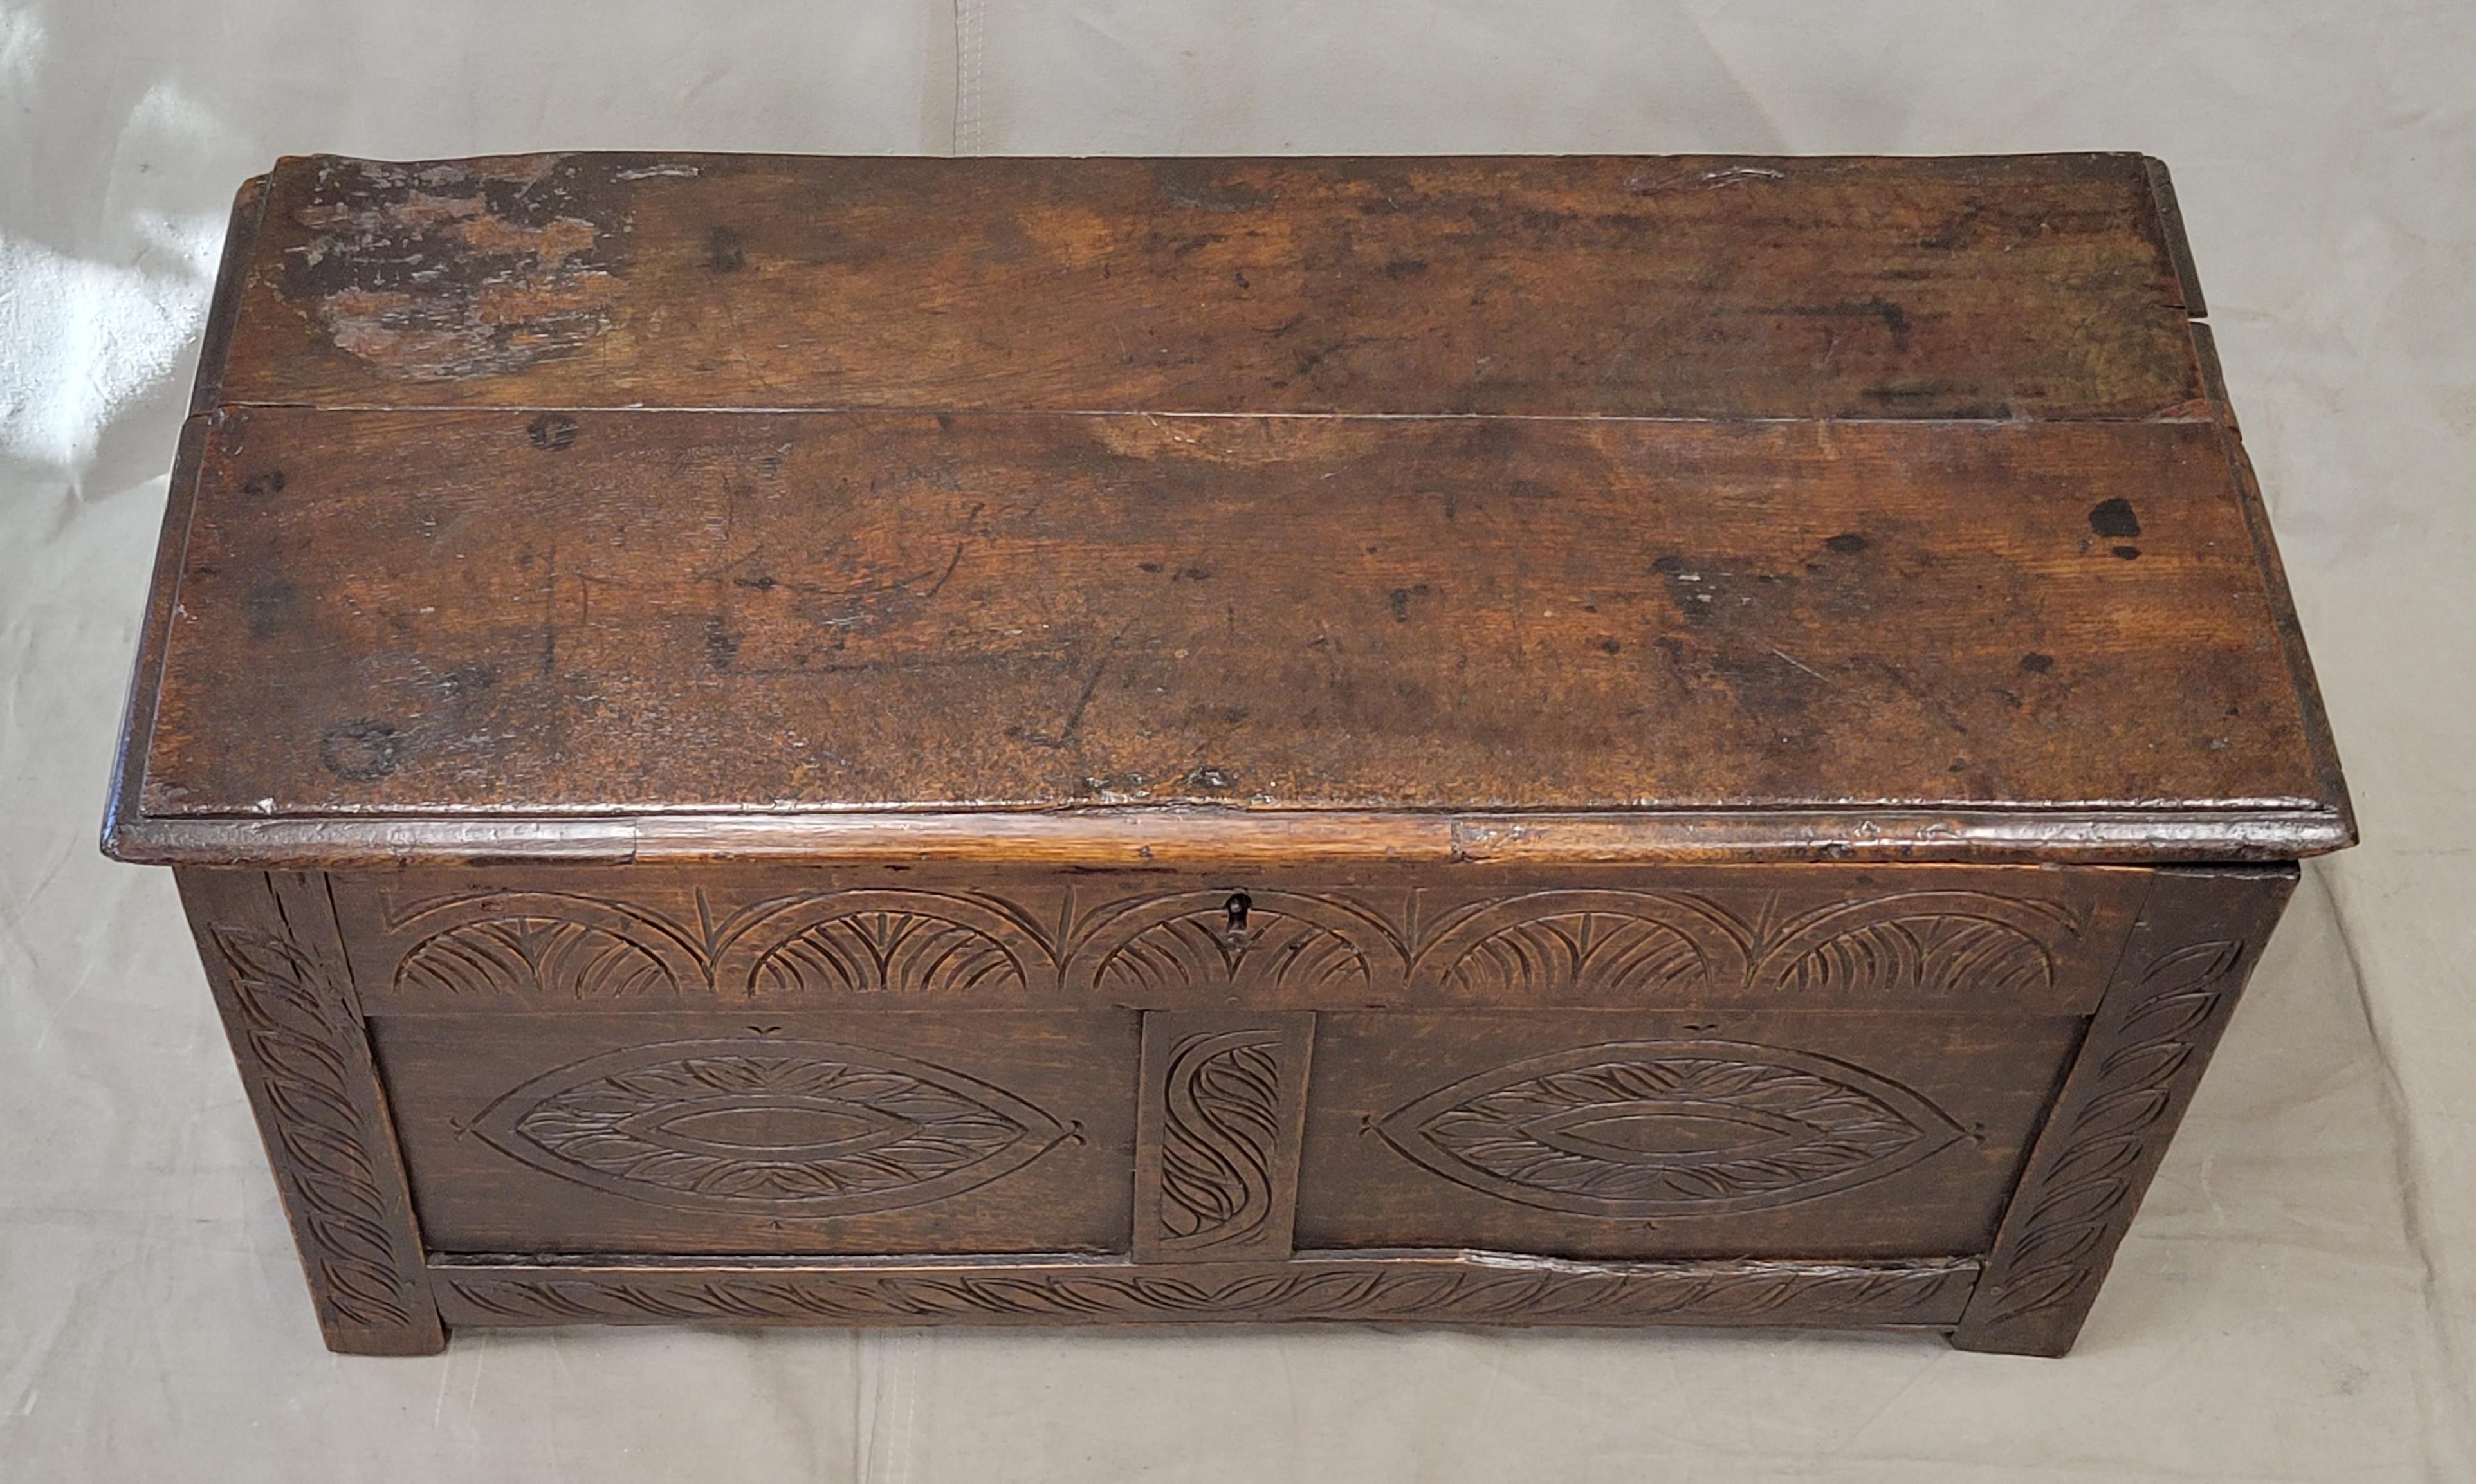 Hand-Carved Antique English Georgian Period Carved Oak Coffer Storage Trunk Blanket Chest